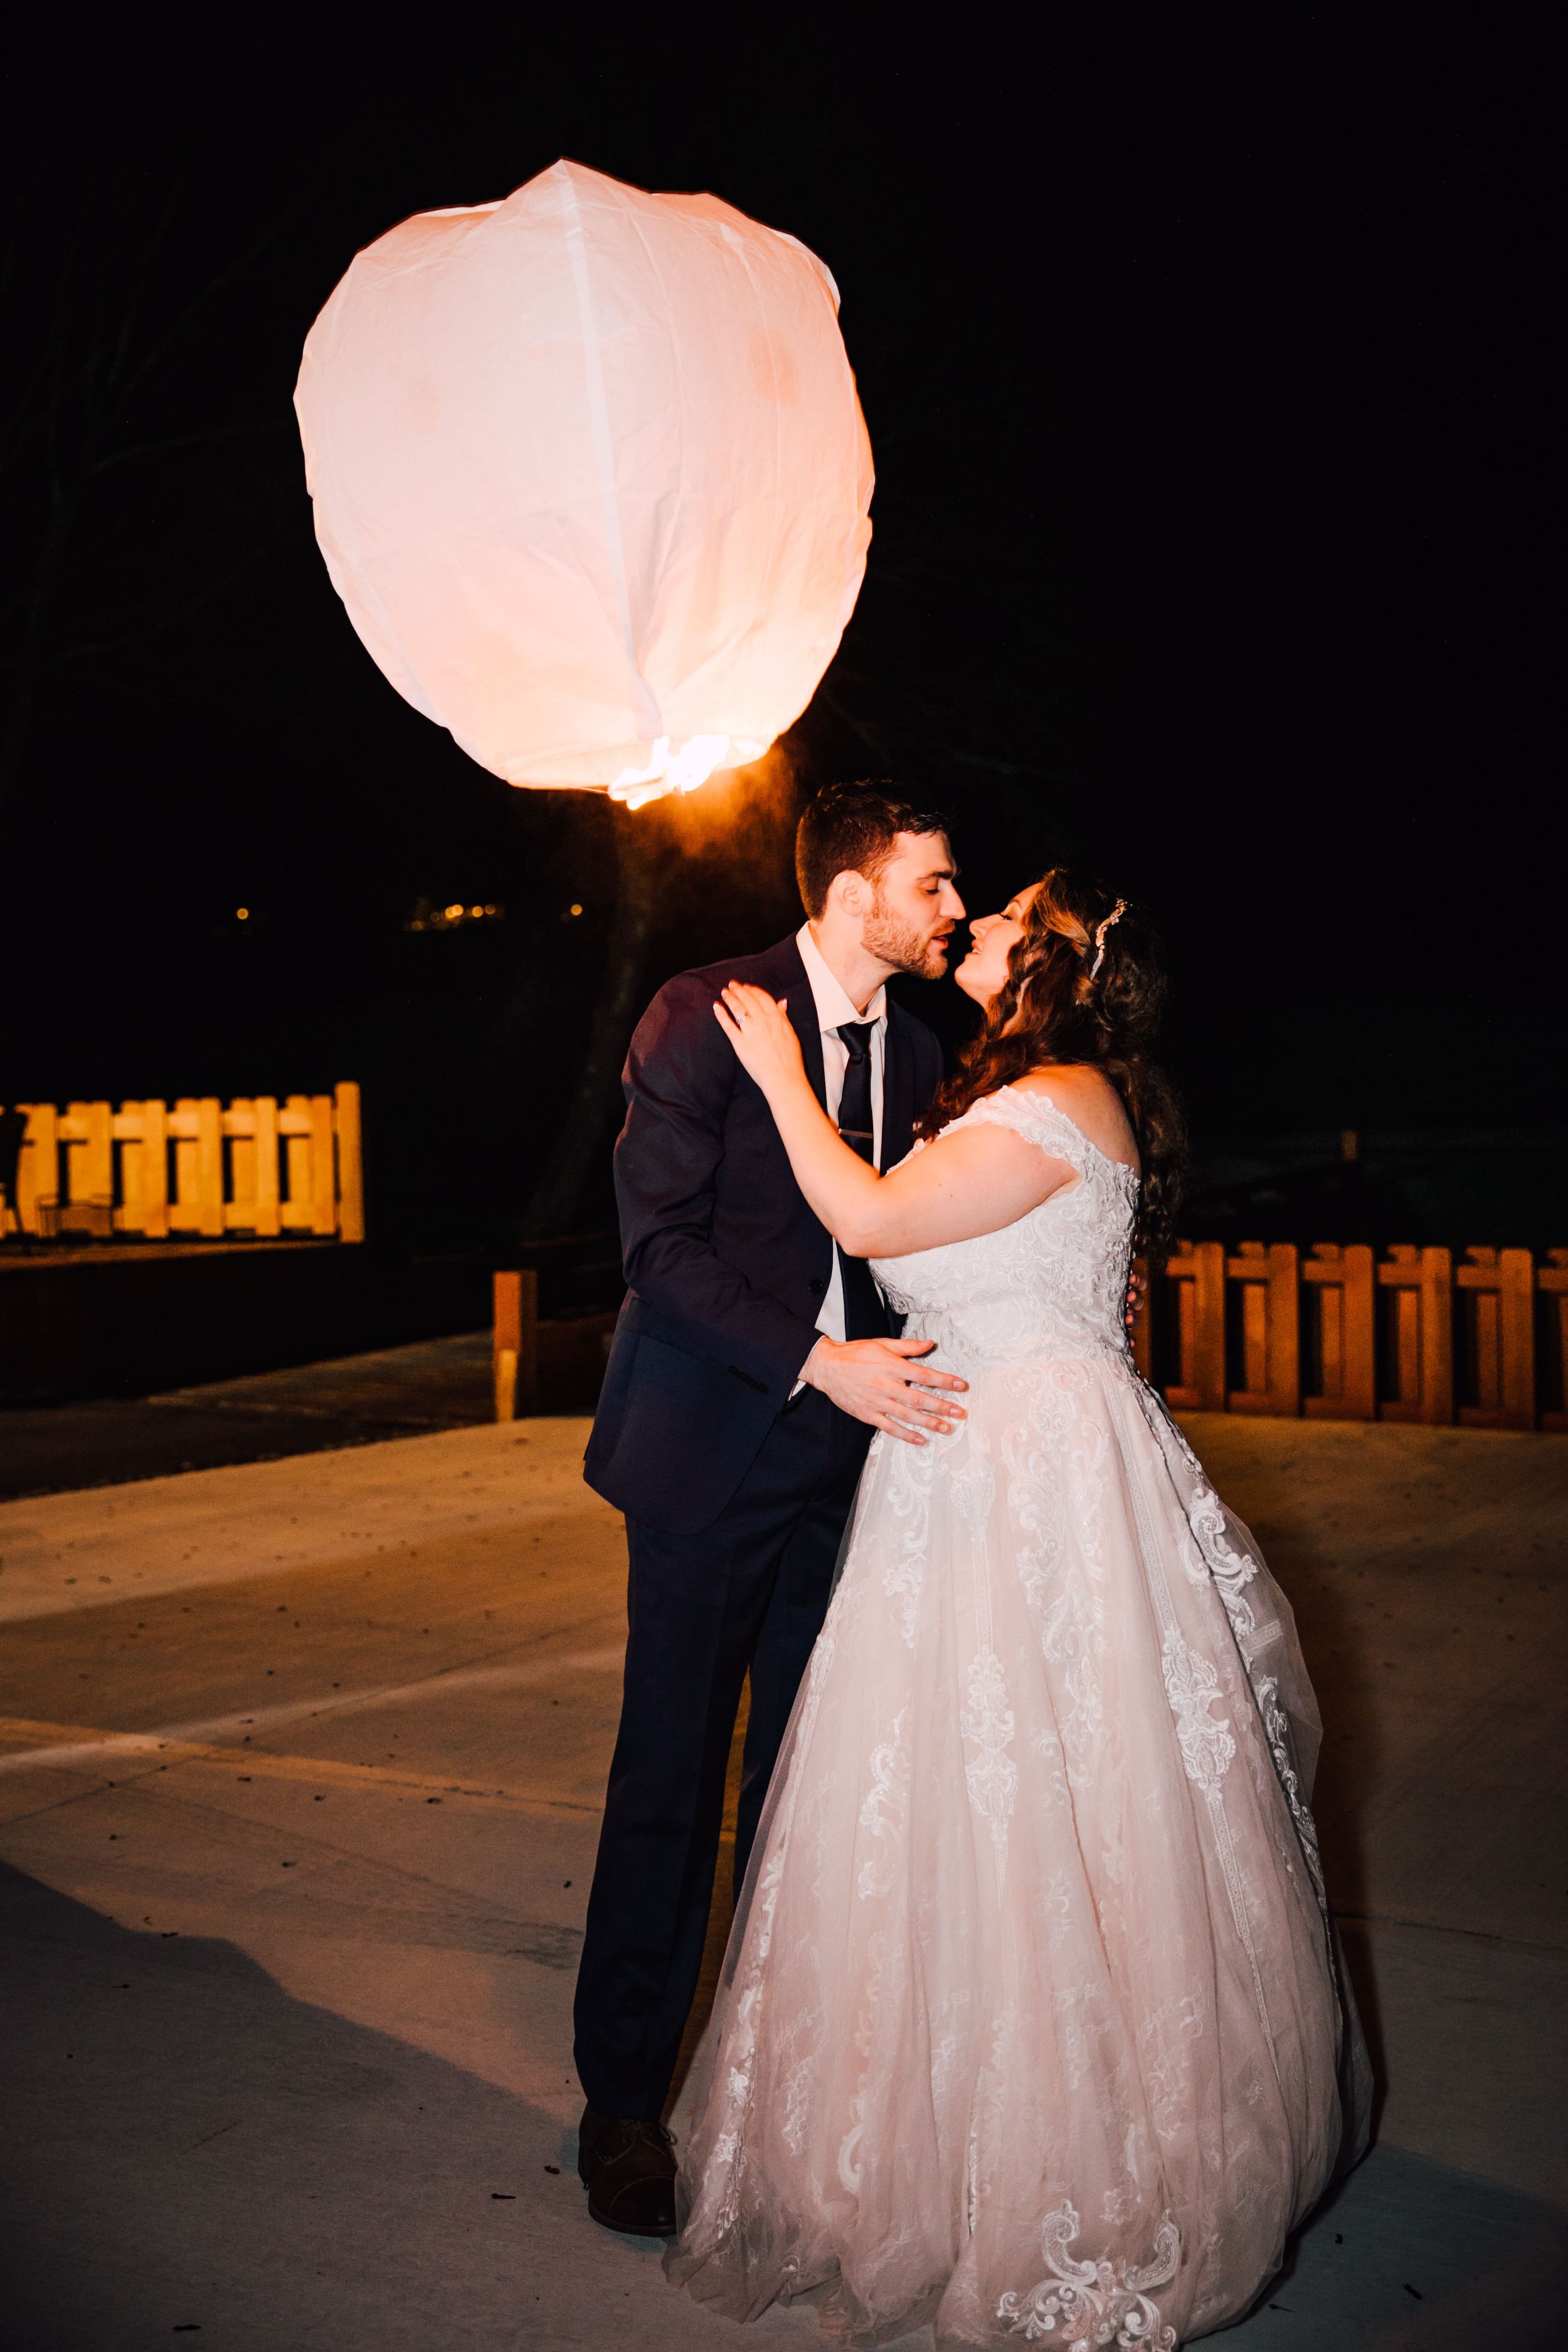  the bride and groom lean in for a kiss during night portraits as a paper lantern flies off behind them during their book themed wedding 